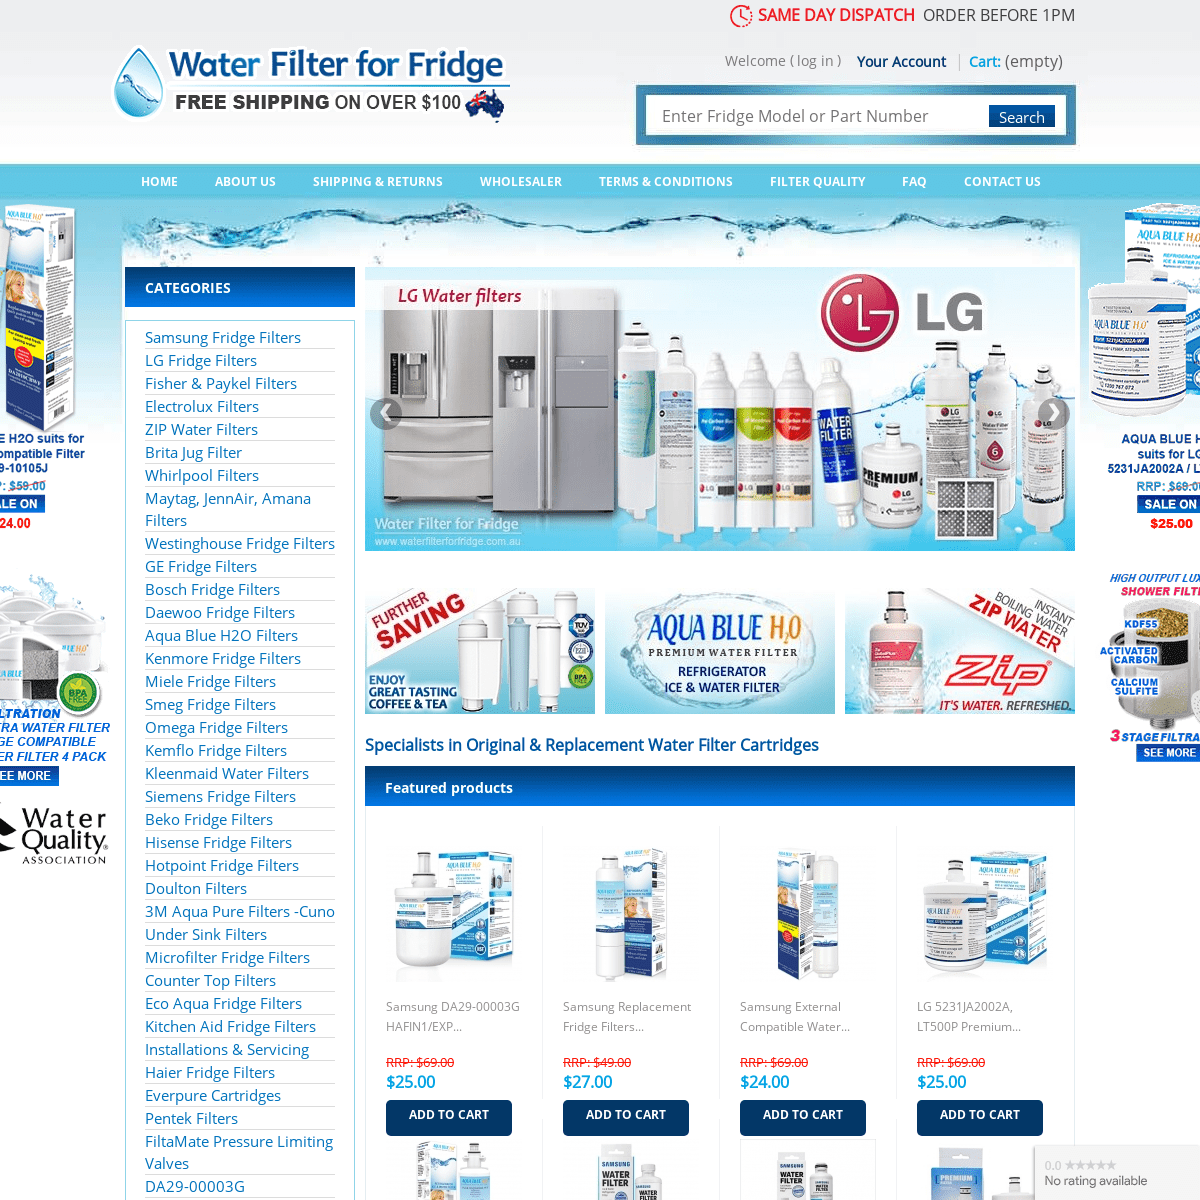 A complete backup of waterfilterforfridge.com.au